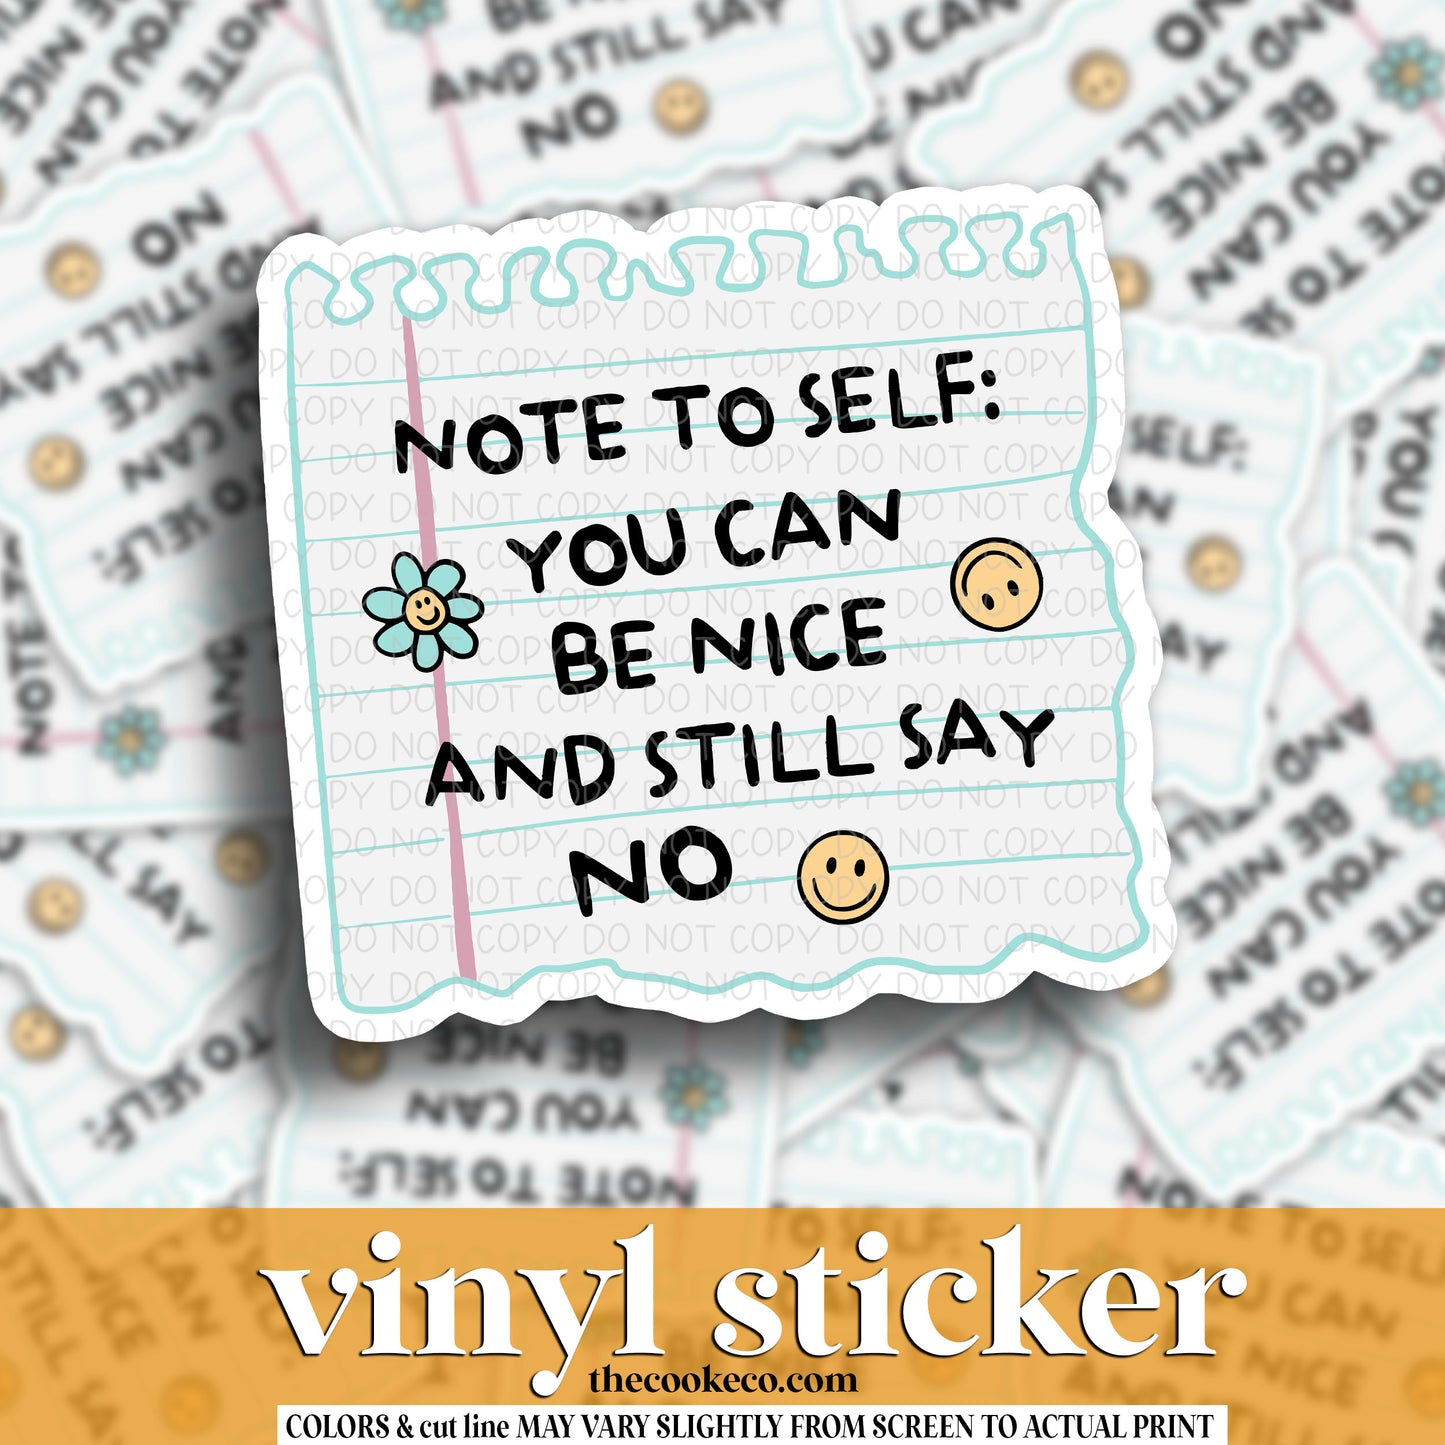 Vinyl Sticker | #V1467 - NOTE TO SELF: YOU CAN BE NICE AND STILL SAY NO